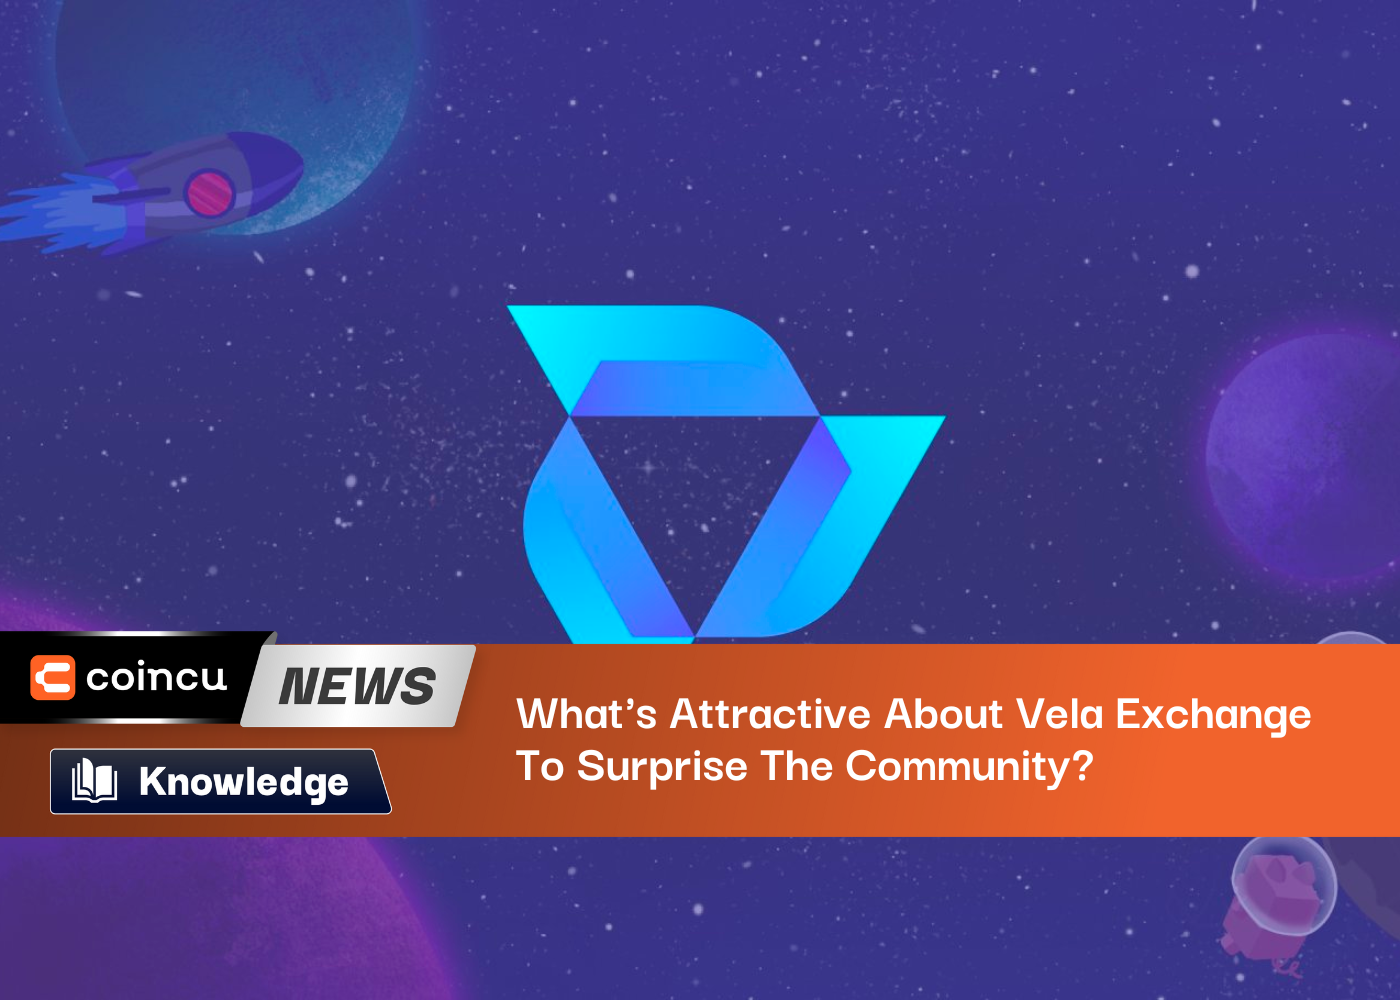 What's Attractive About Vela Exchange To Surprise The Community?